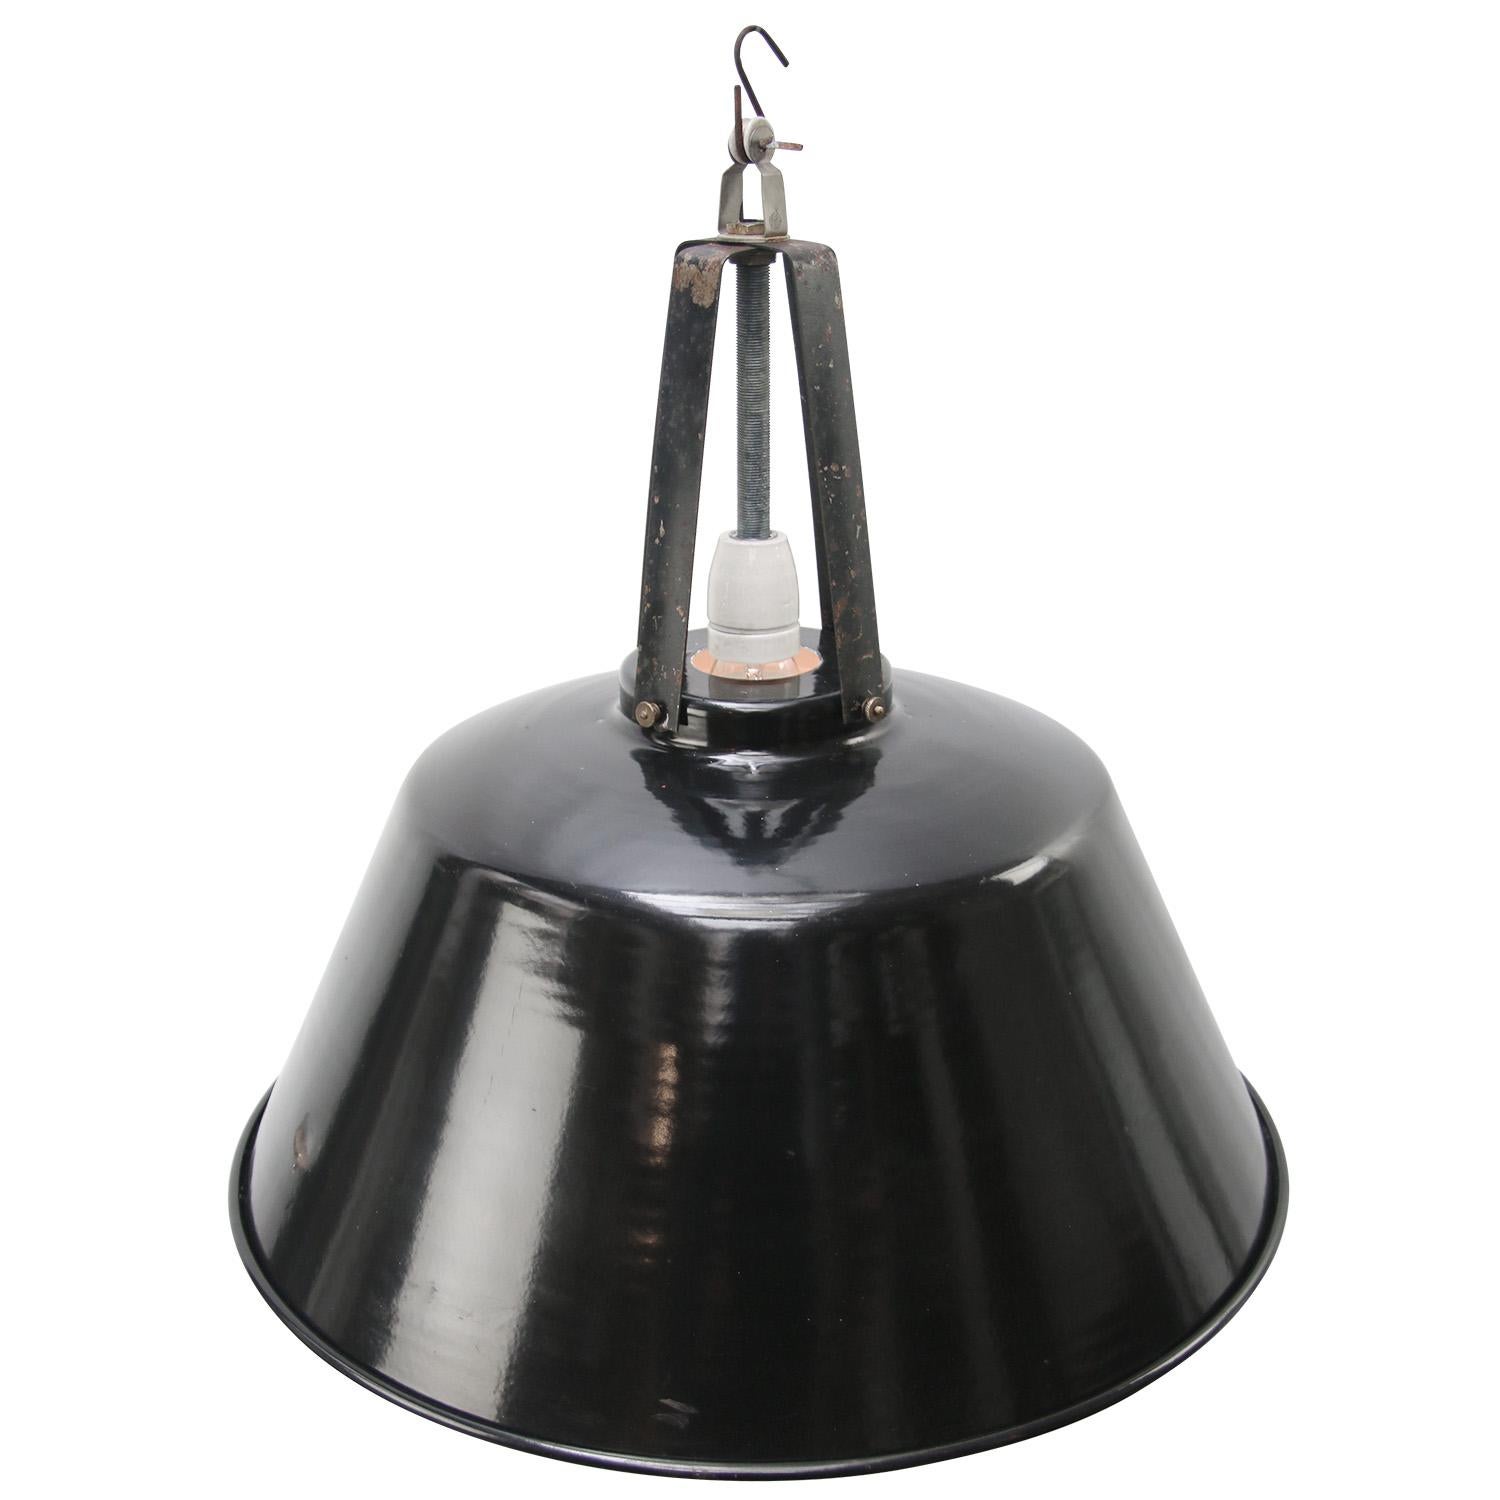 Black enamel Industrial pendant.
Iron top. White interior.

Weight: 4.00 kg / 8.8 lb

Priced per individual item. All lamps have been made suitable by international standards for incandescent light bulbs, energy-efficient and LED bulbs. E26/E27